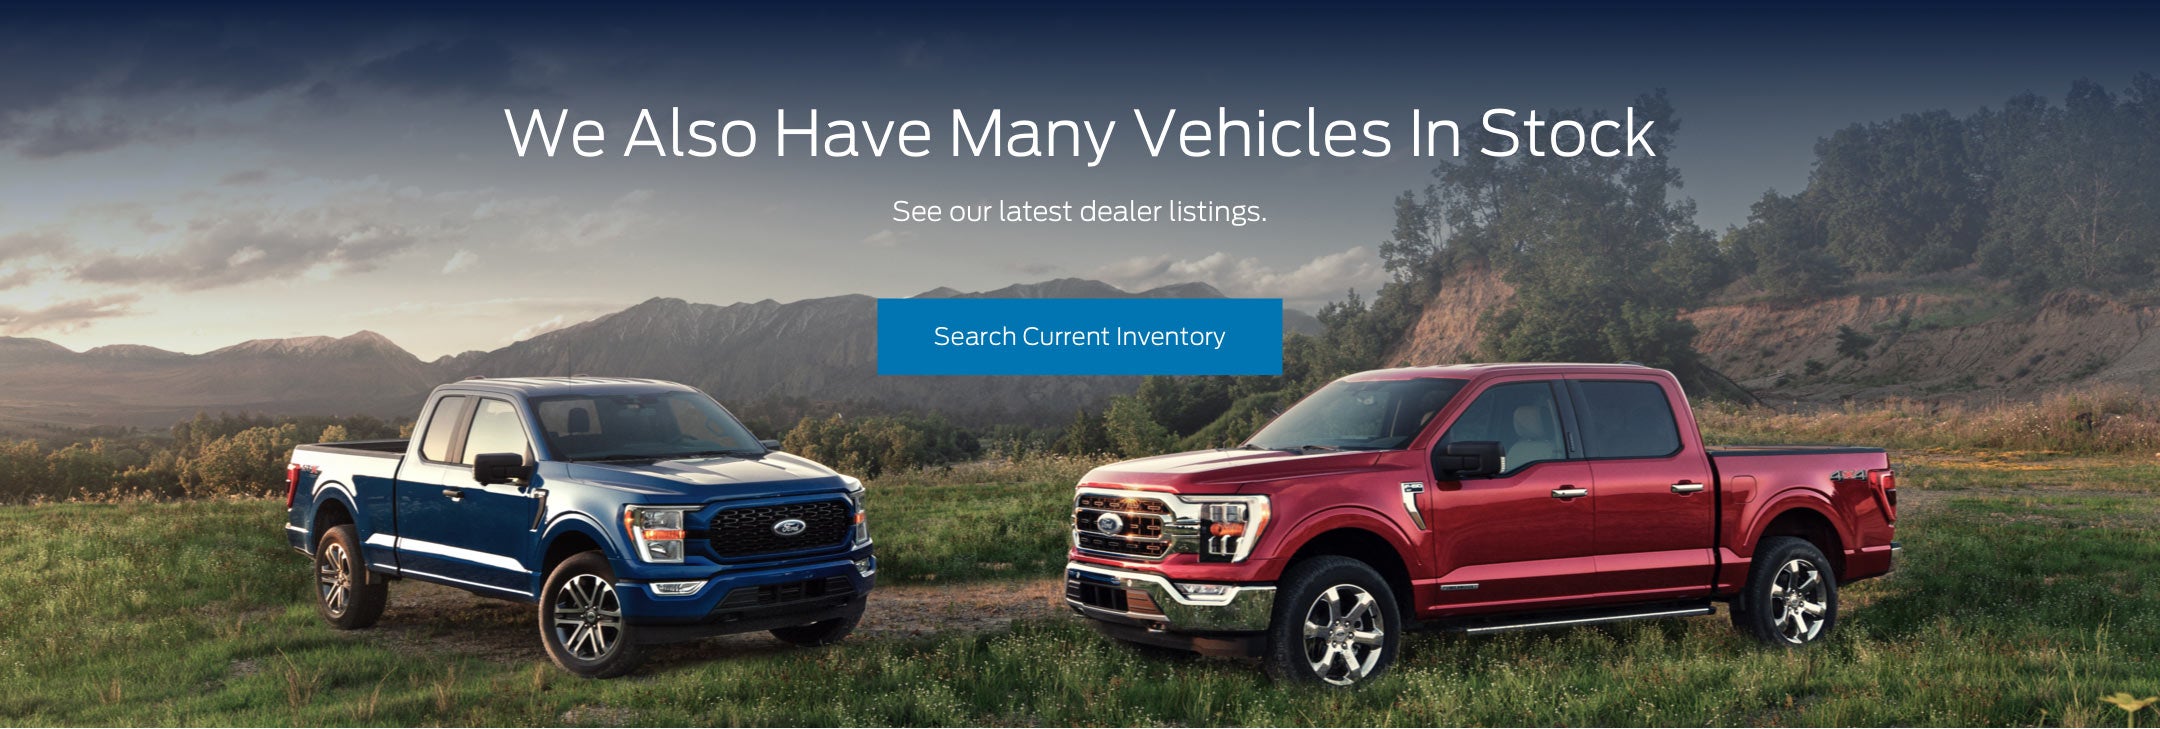 Ford vehicles in stock | Klaben Ford Lincoln in Kent OH